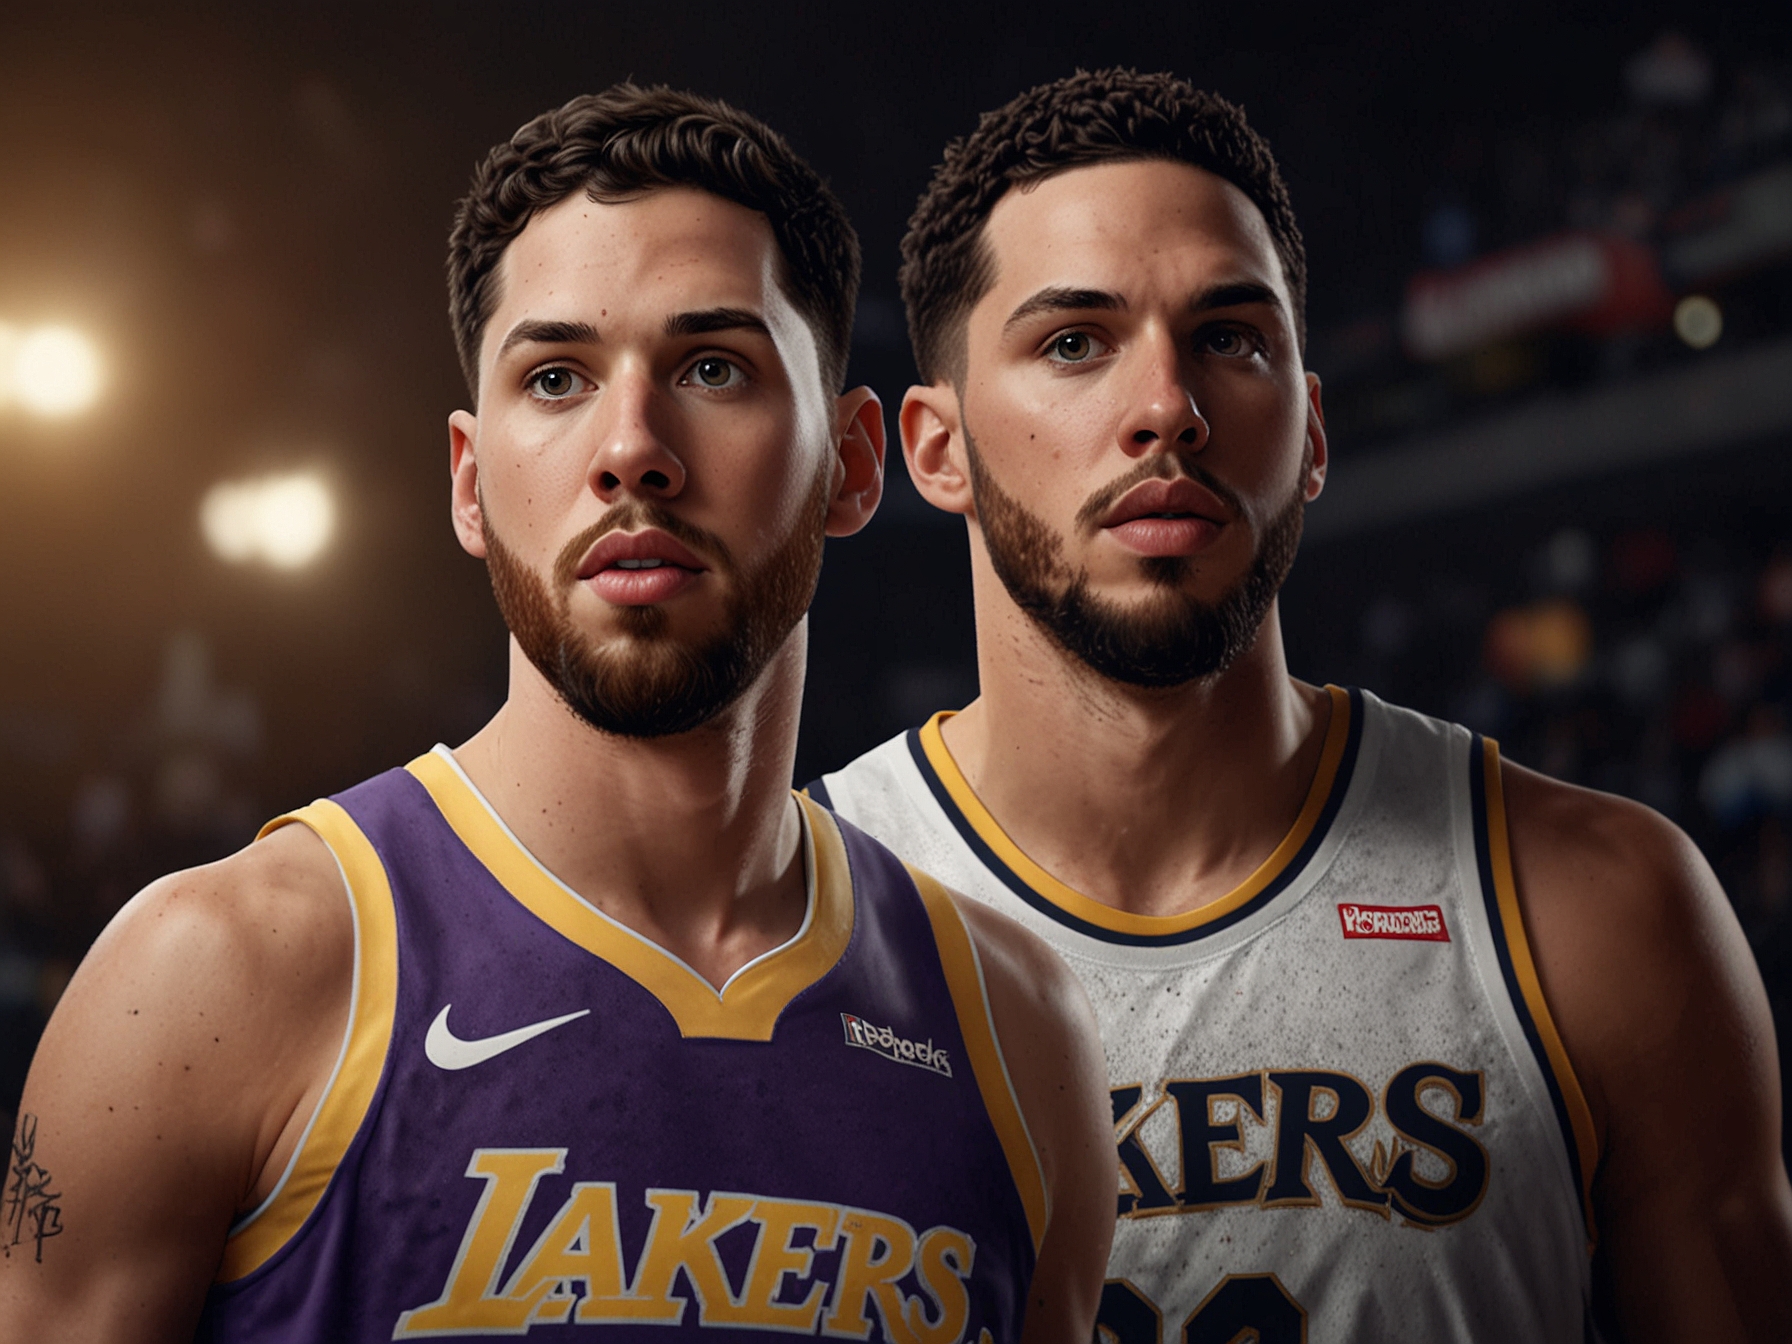 A potential illustration could include Anthony Davis and JJ Redick in animated Lakers outfits, highlighting the uncertainty of their future collaboration and the high stakes involved.